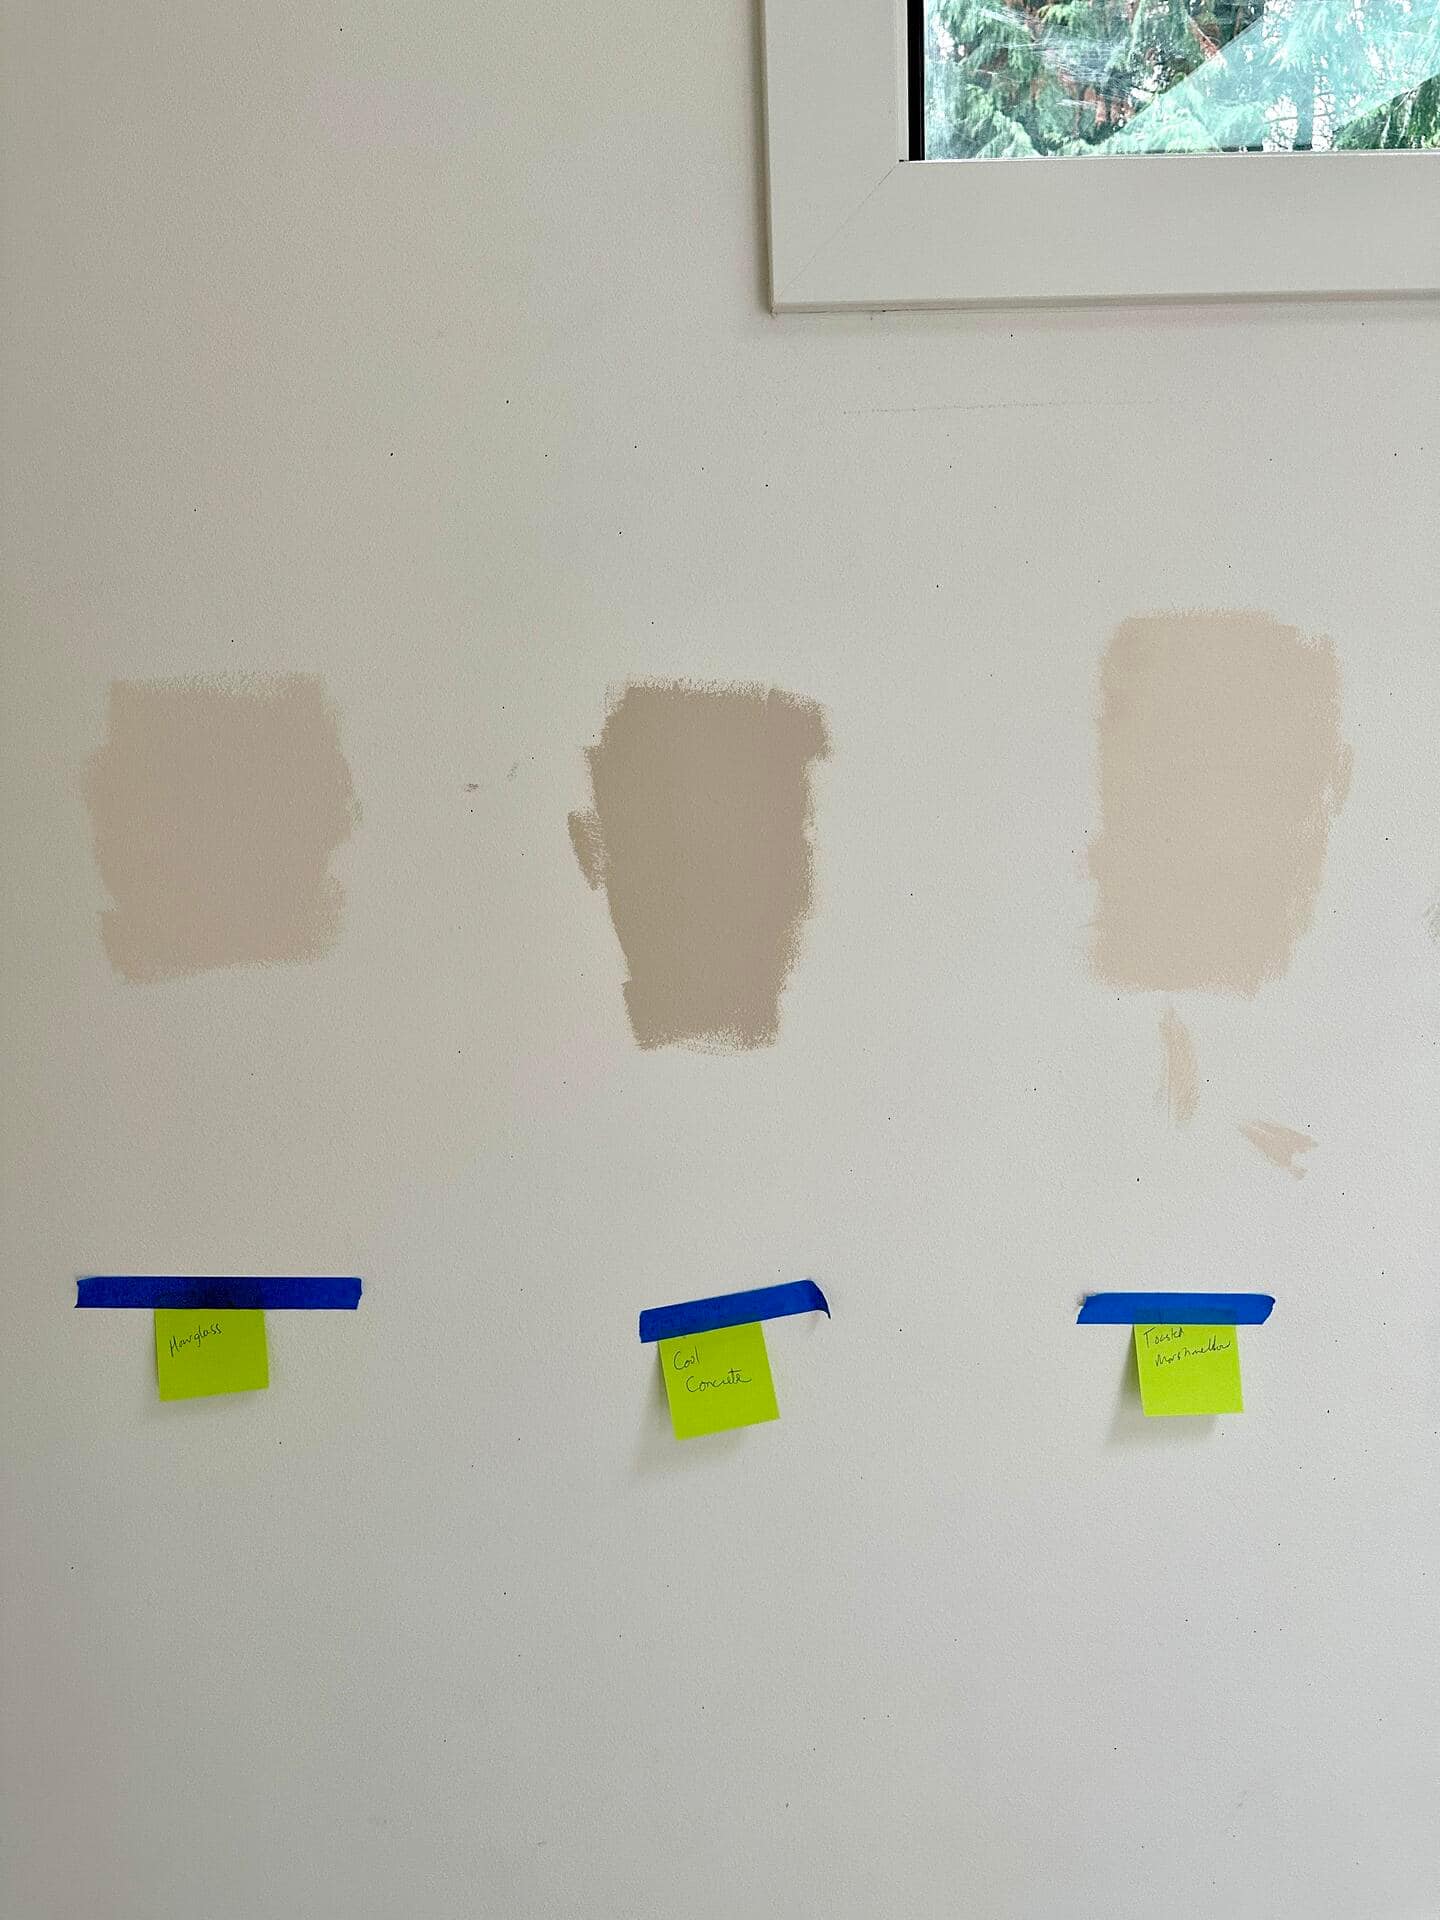 Three paint colors tested on a wall, with yellow sticky notes below for identification